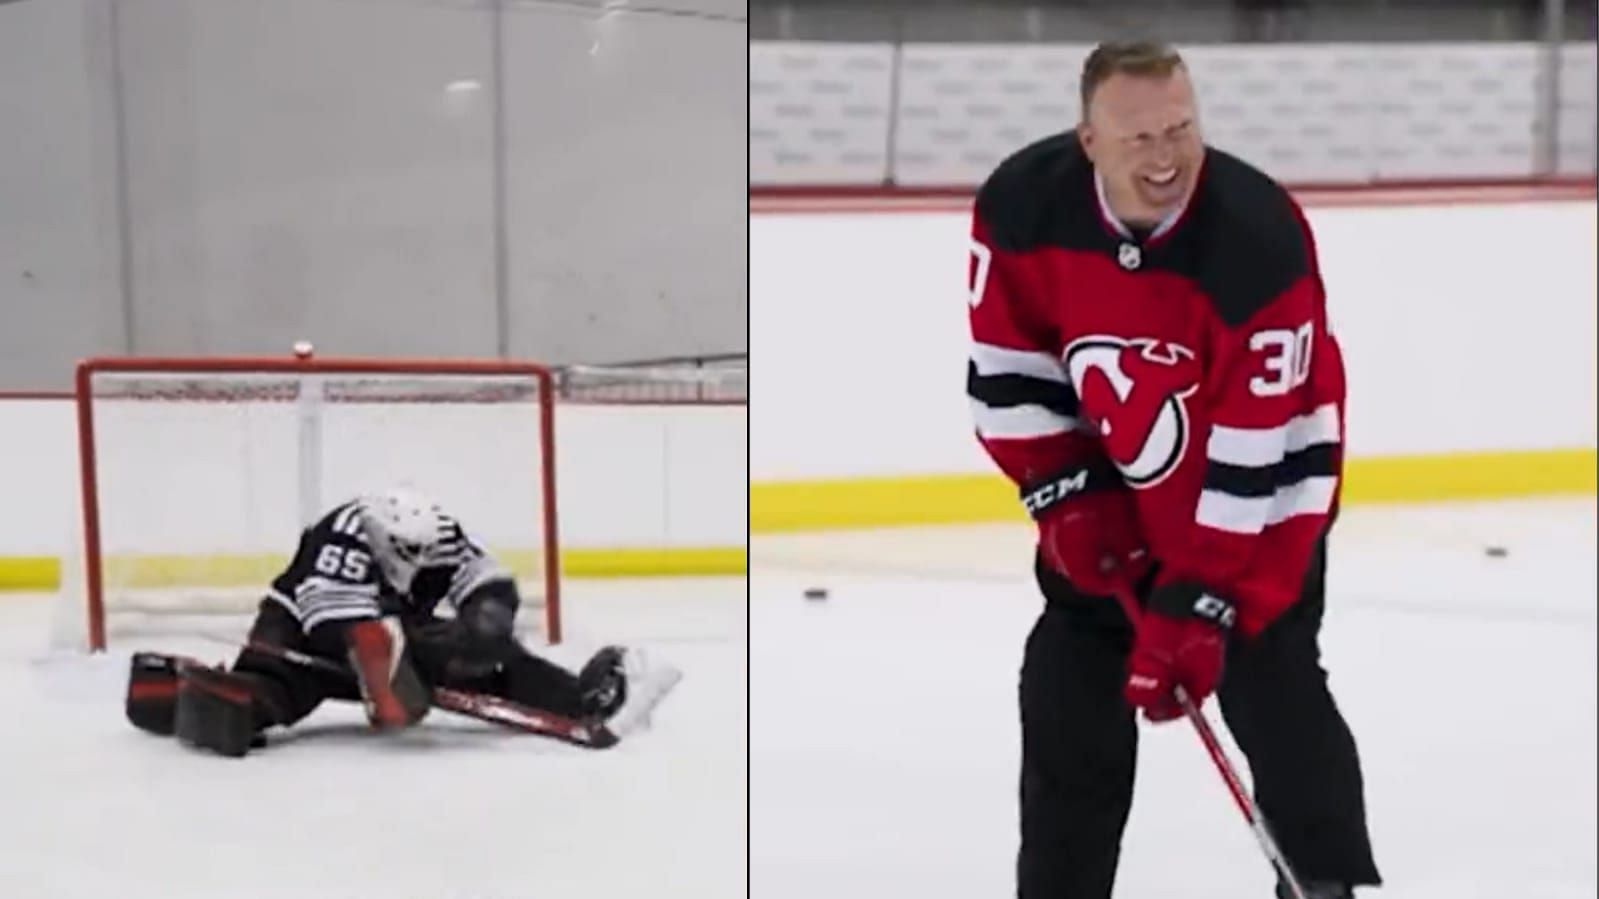 PK Subban becomes goalie and takes shots from Martin Brodeur in viral video